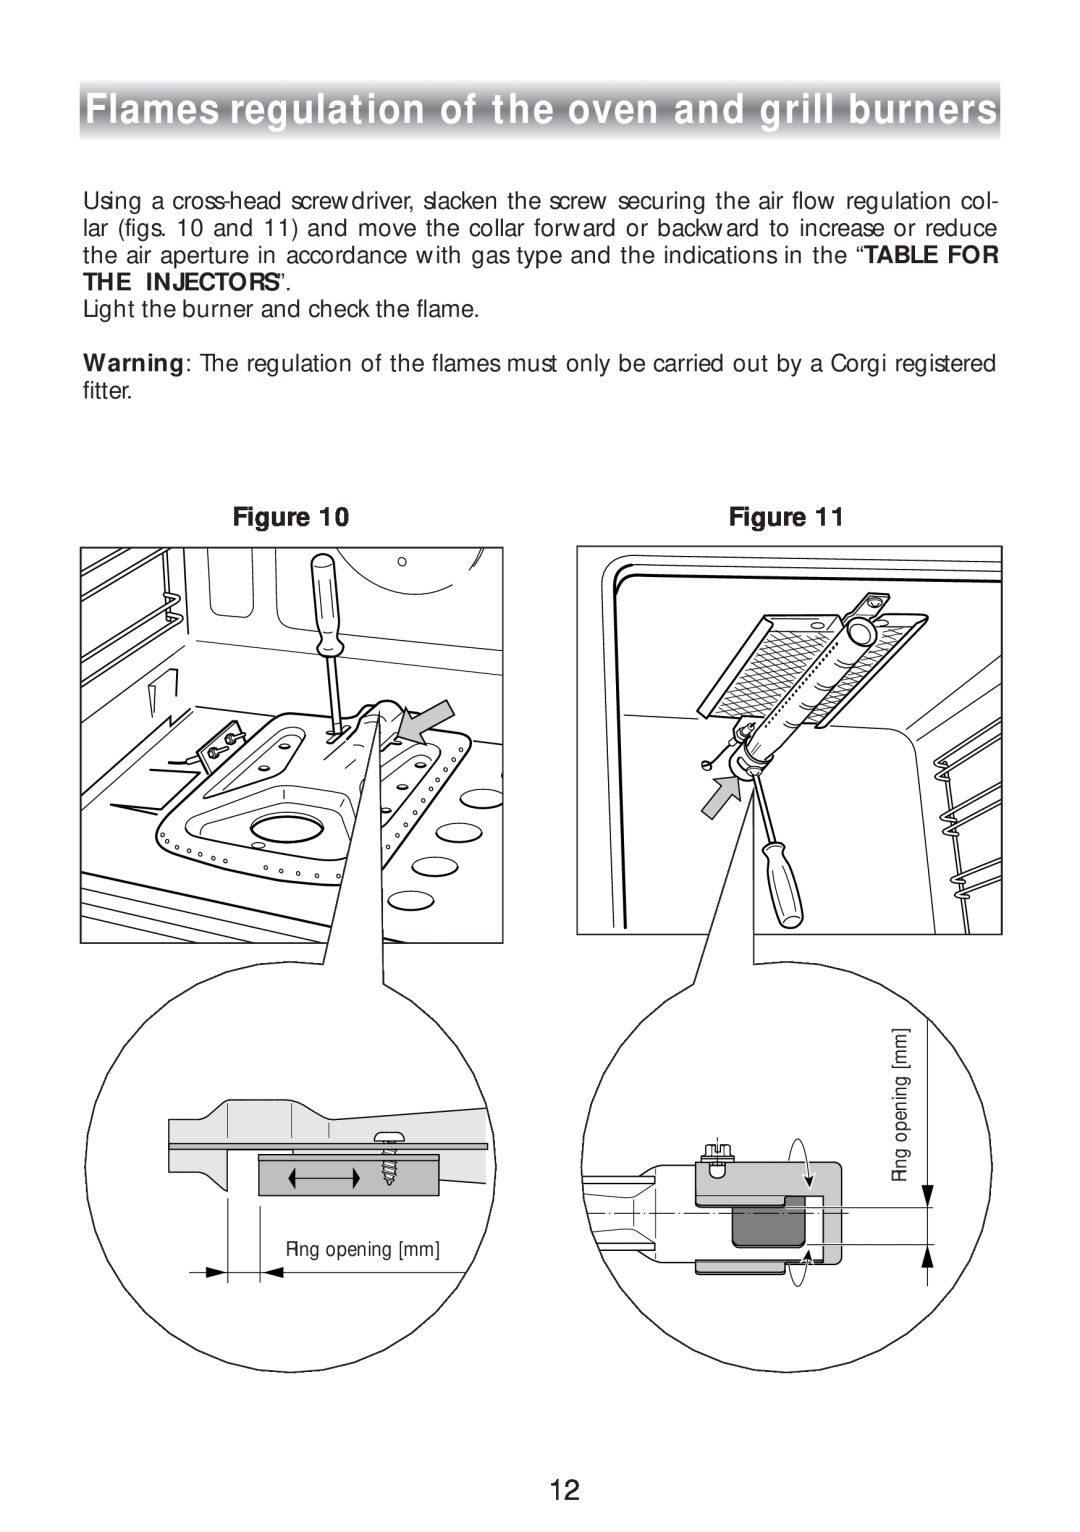 CDA SC309 manual Flames regulation of the oven and grill burners 